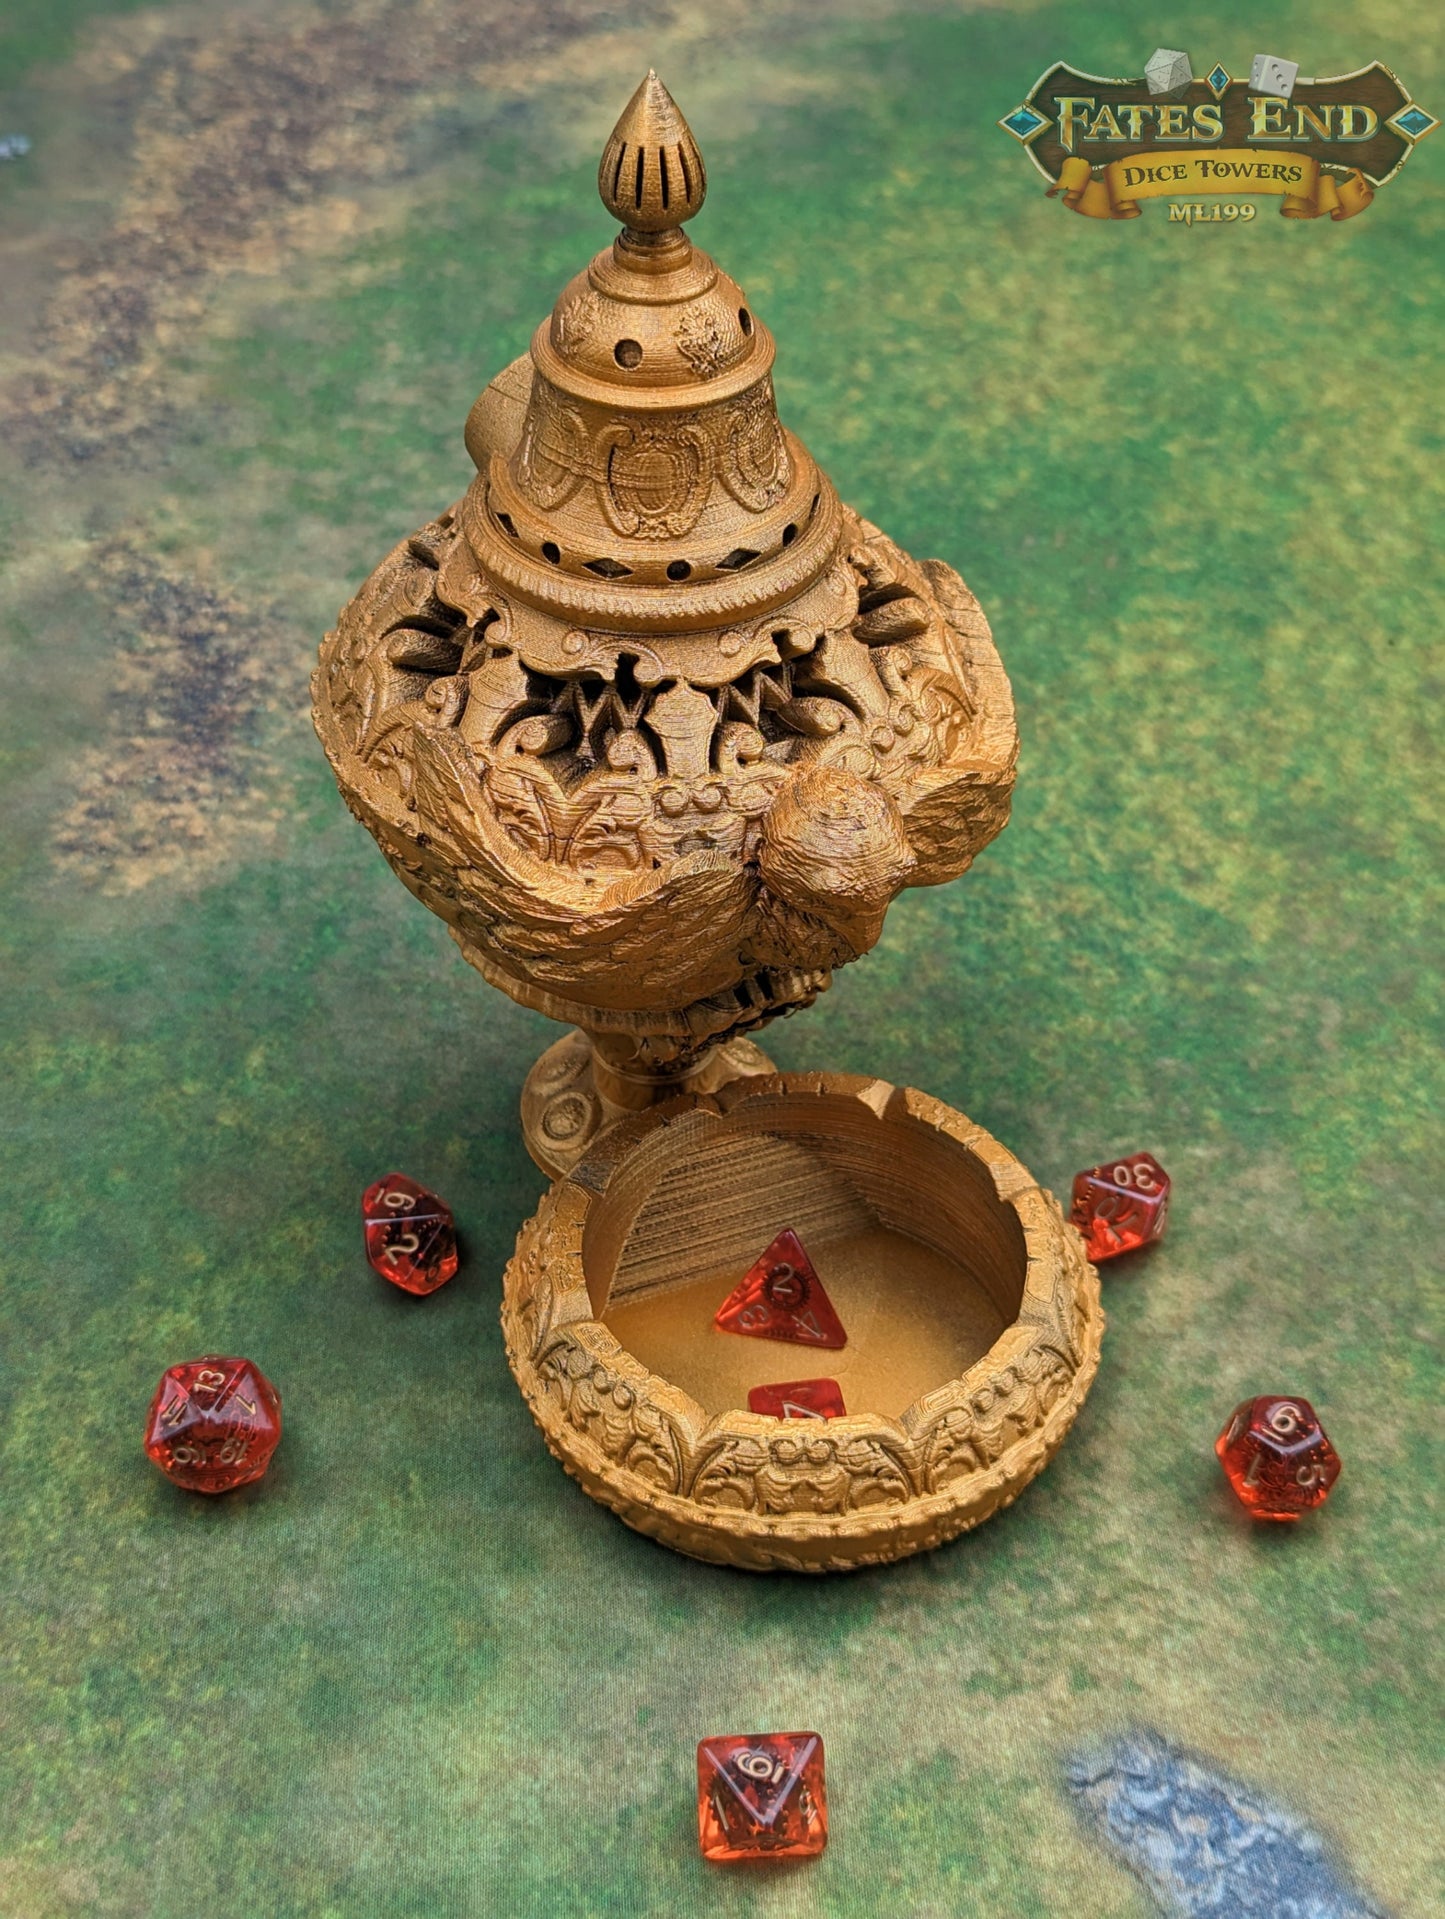 Cleric Owl Dice Tower by Furhaven - Fate's End Collection - Channel Wisdom and Mystique with Every Divine Toss.